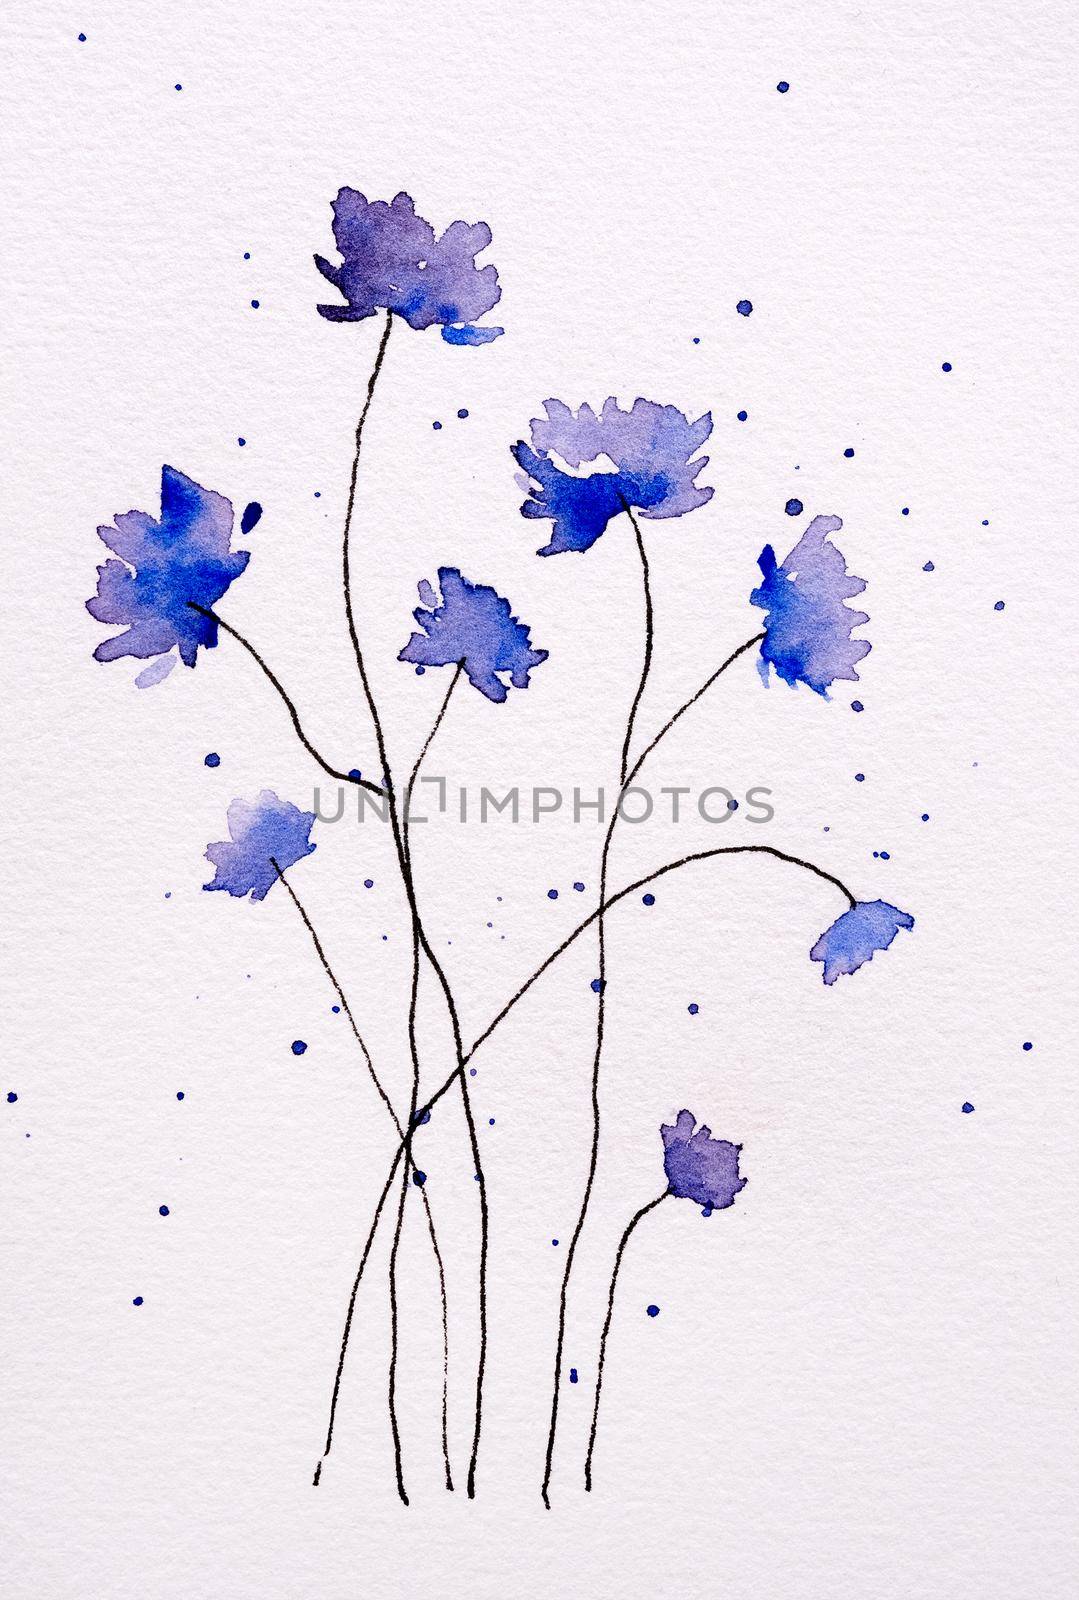 Watercolor flowers paintings for romantic postcards and greetings. Floral blossom spring summer art